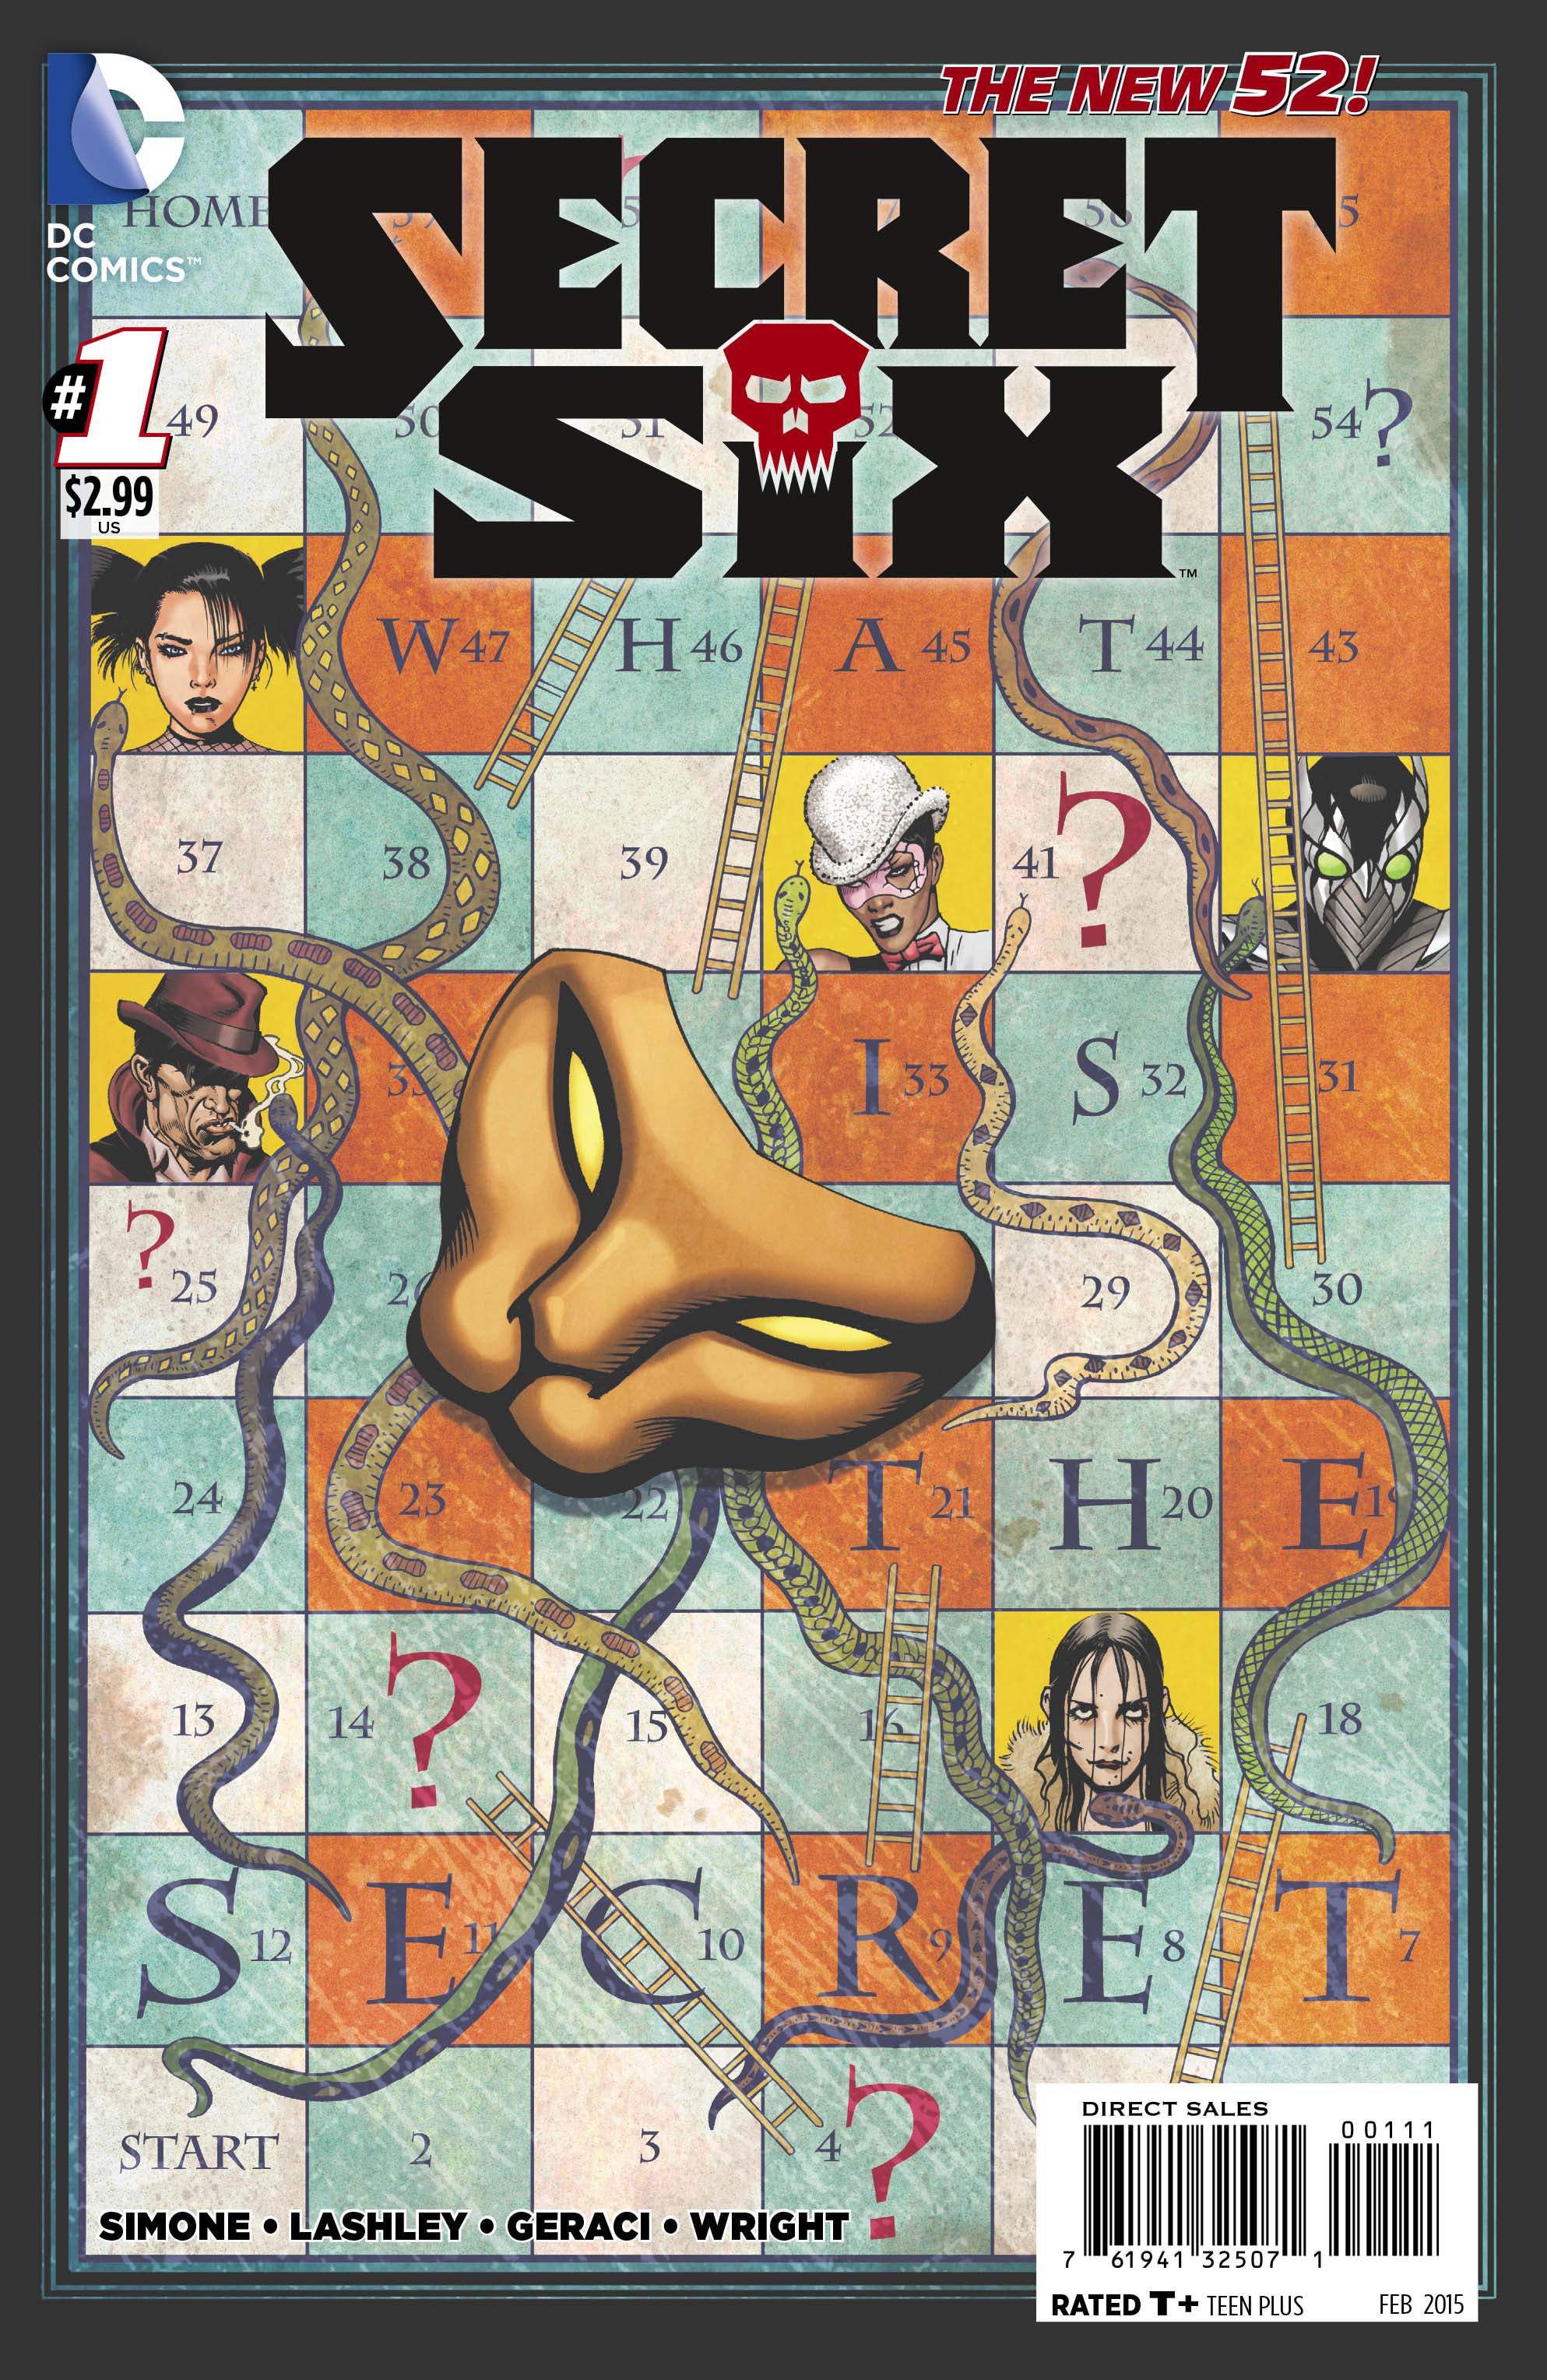 Photo of Secret Six Issue 1 comic sold by Stronghold Collectibles